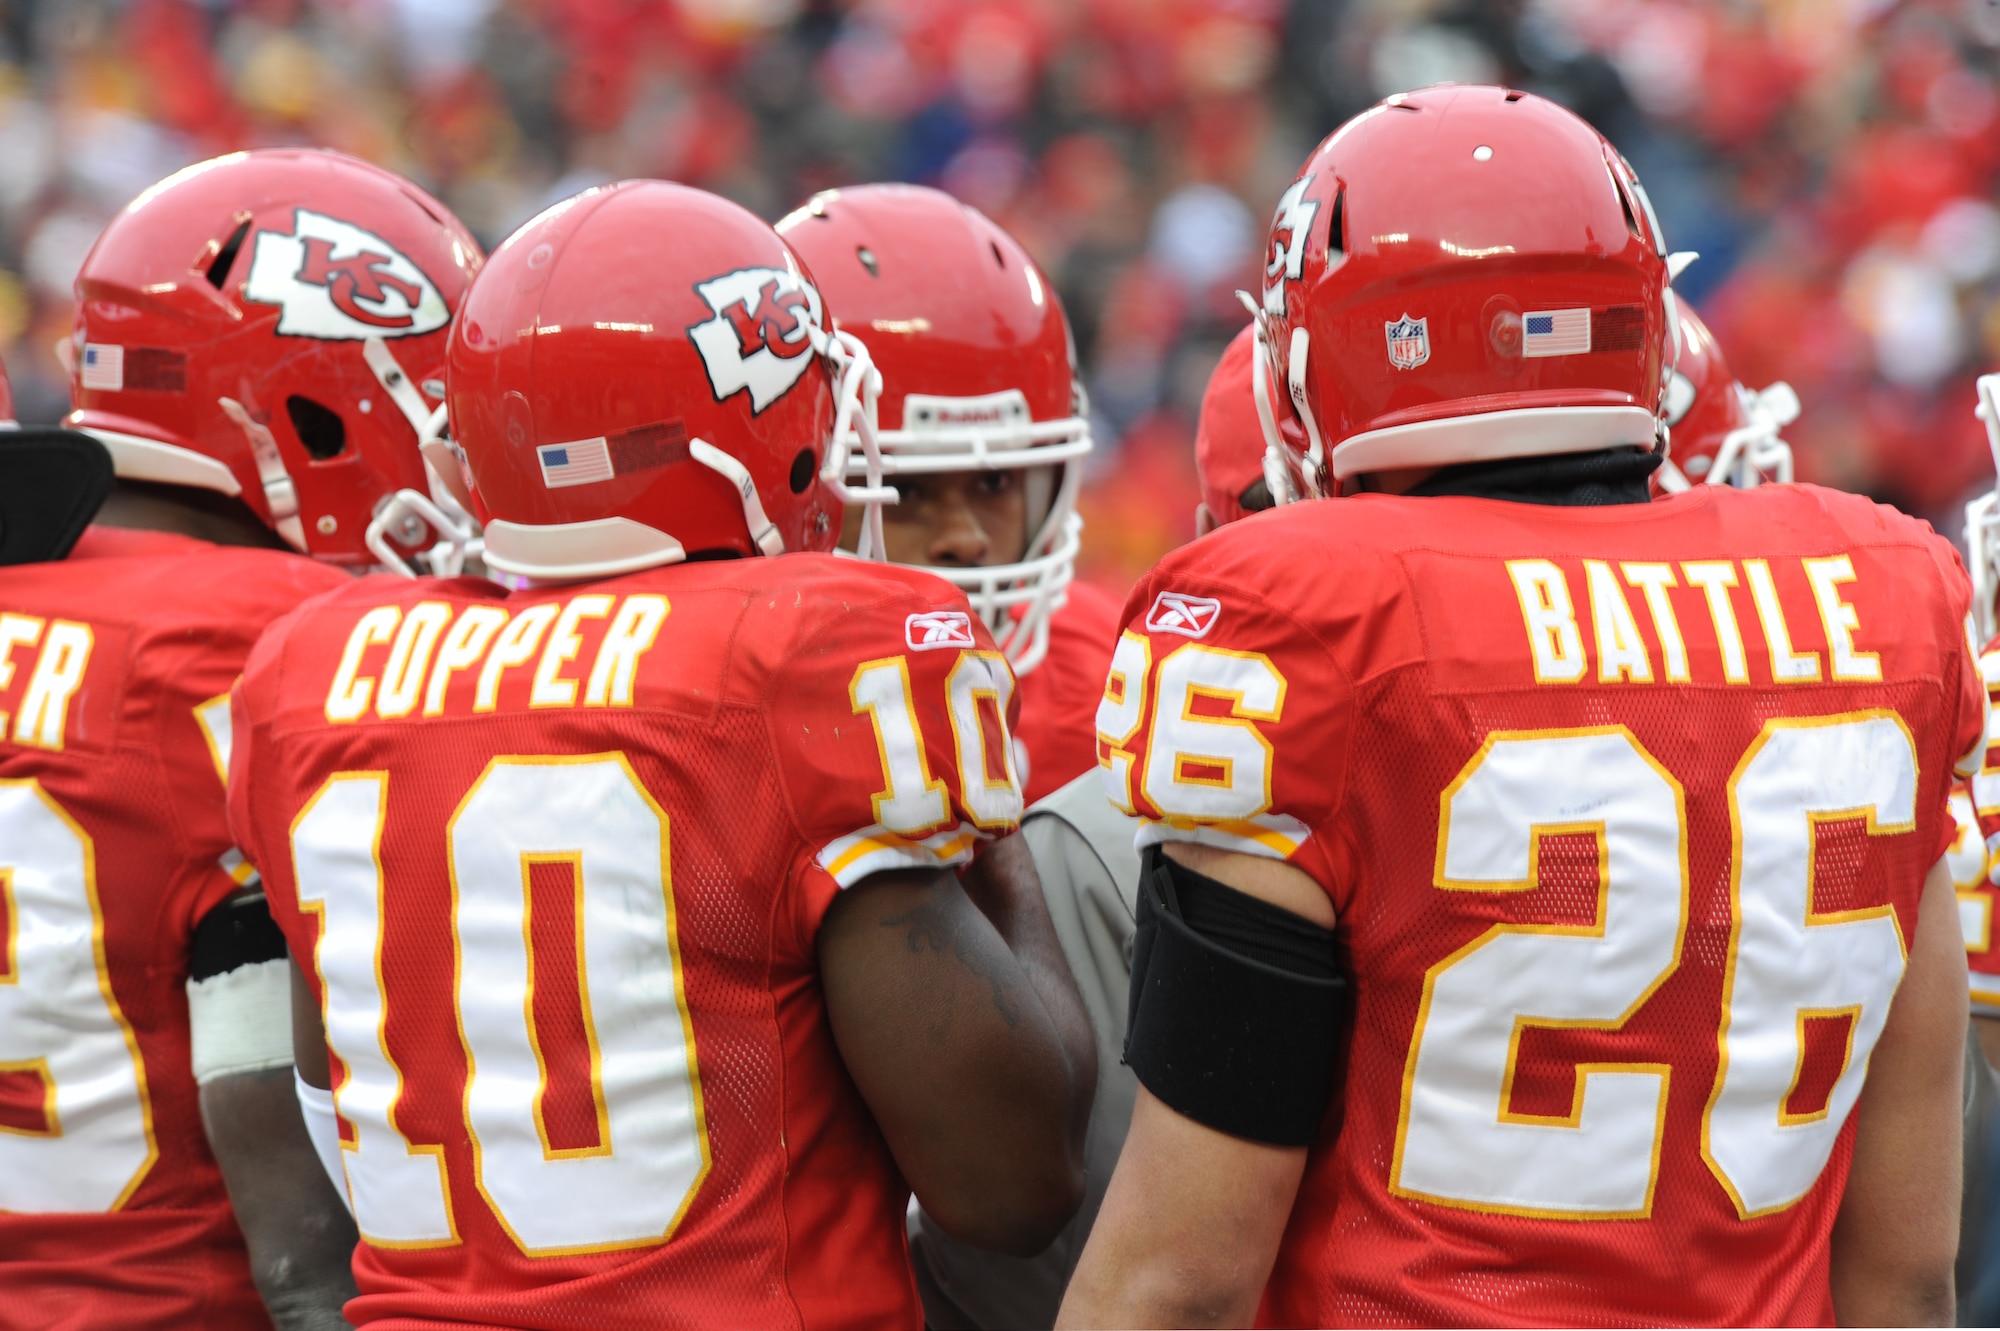 KANSAS CITY, Mo. - Members of the Kansas City Chiefs team huddle with their coordinator, during a National Football League Wild Card game Jan 9. The Chiefs lost to the Baltimore Ravens 30-7. (U.S. Air Force photo by Senior Airman Carlin Leslie)
